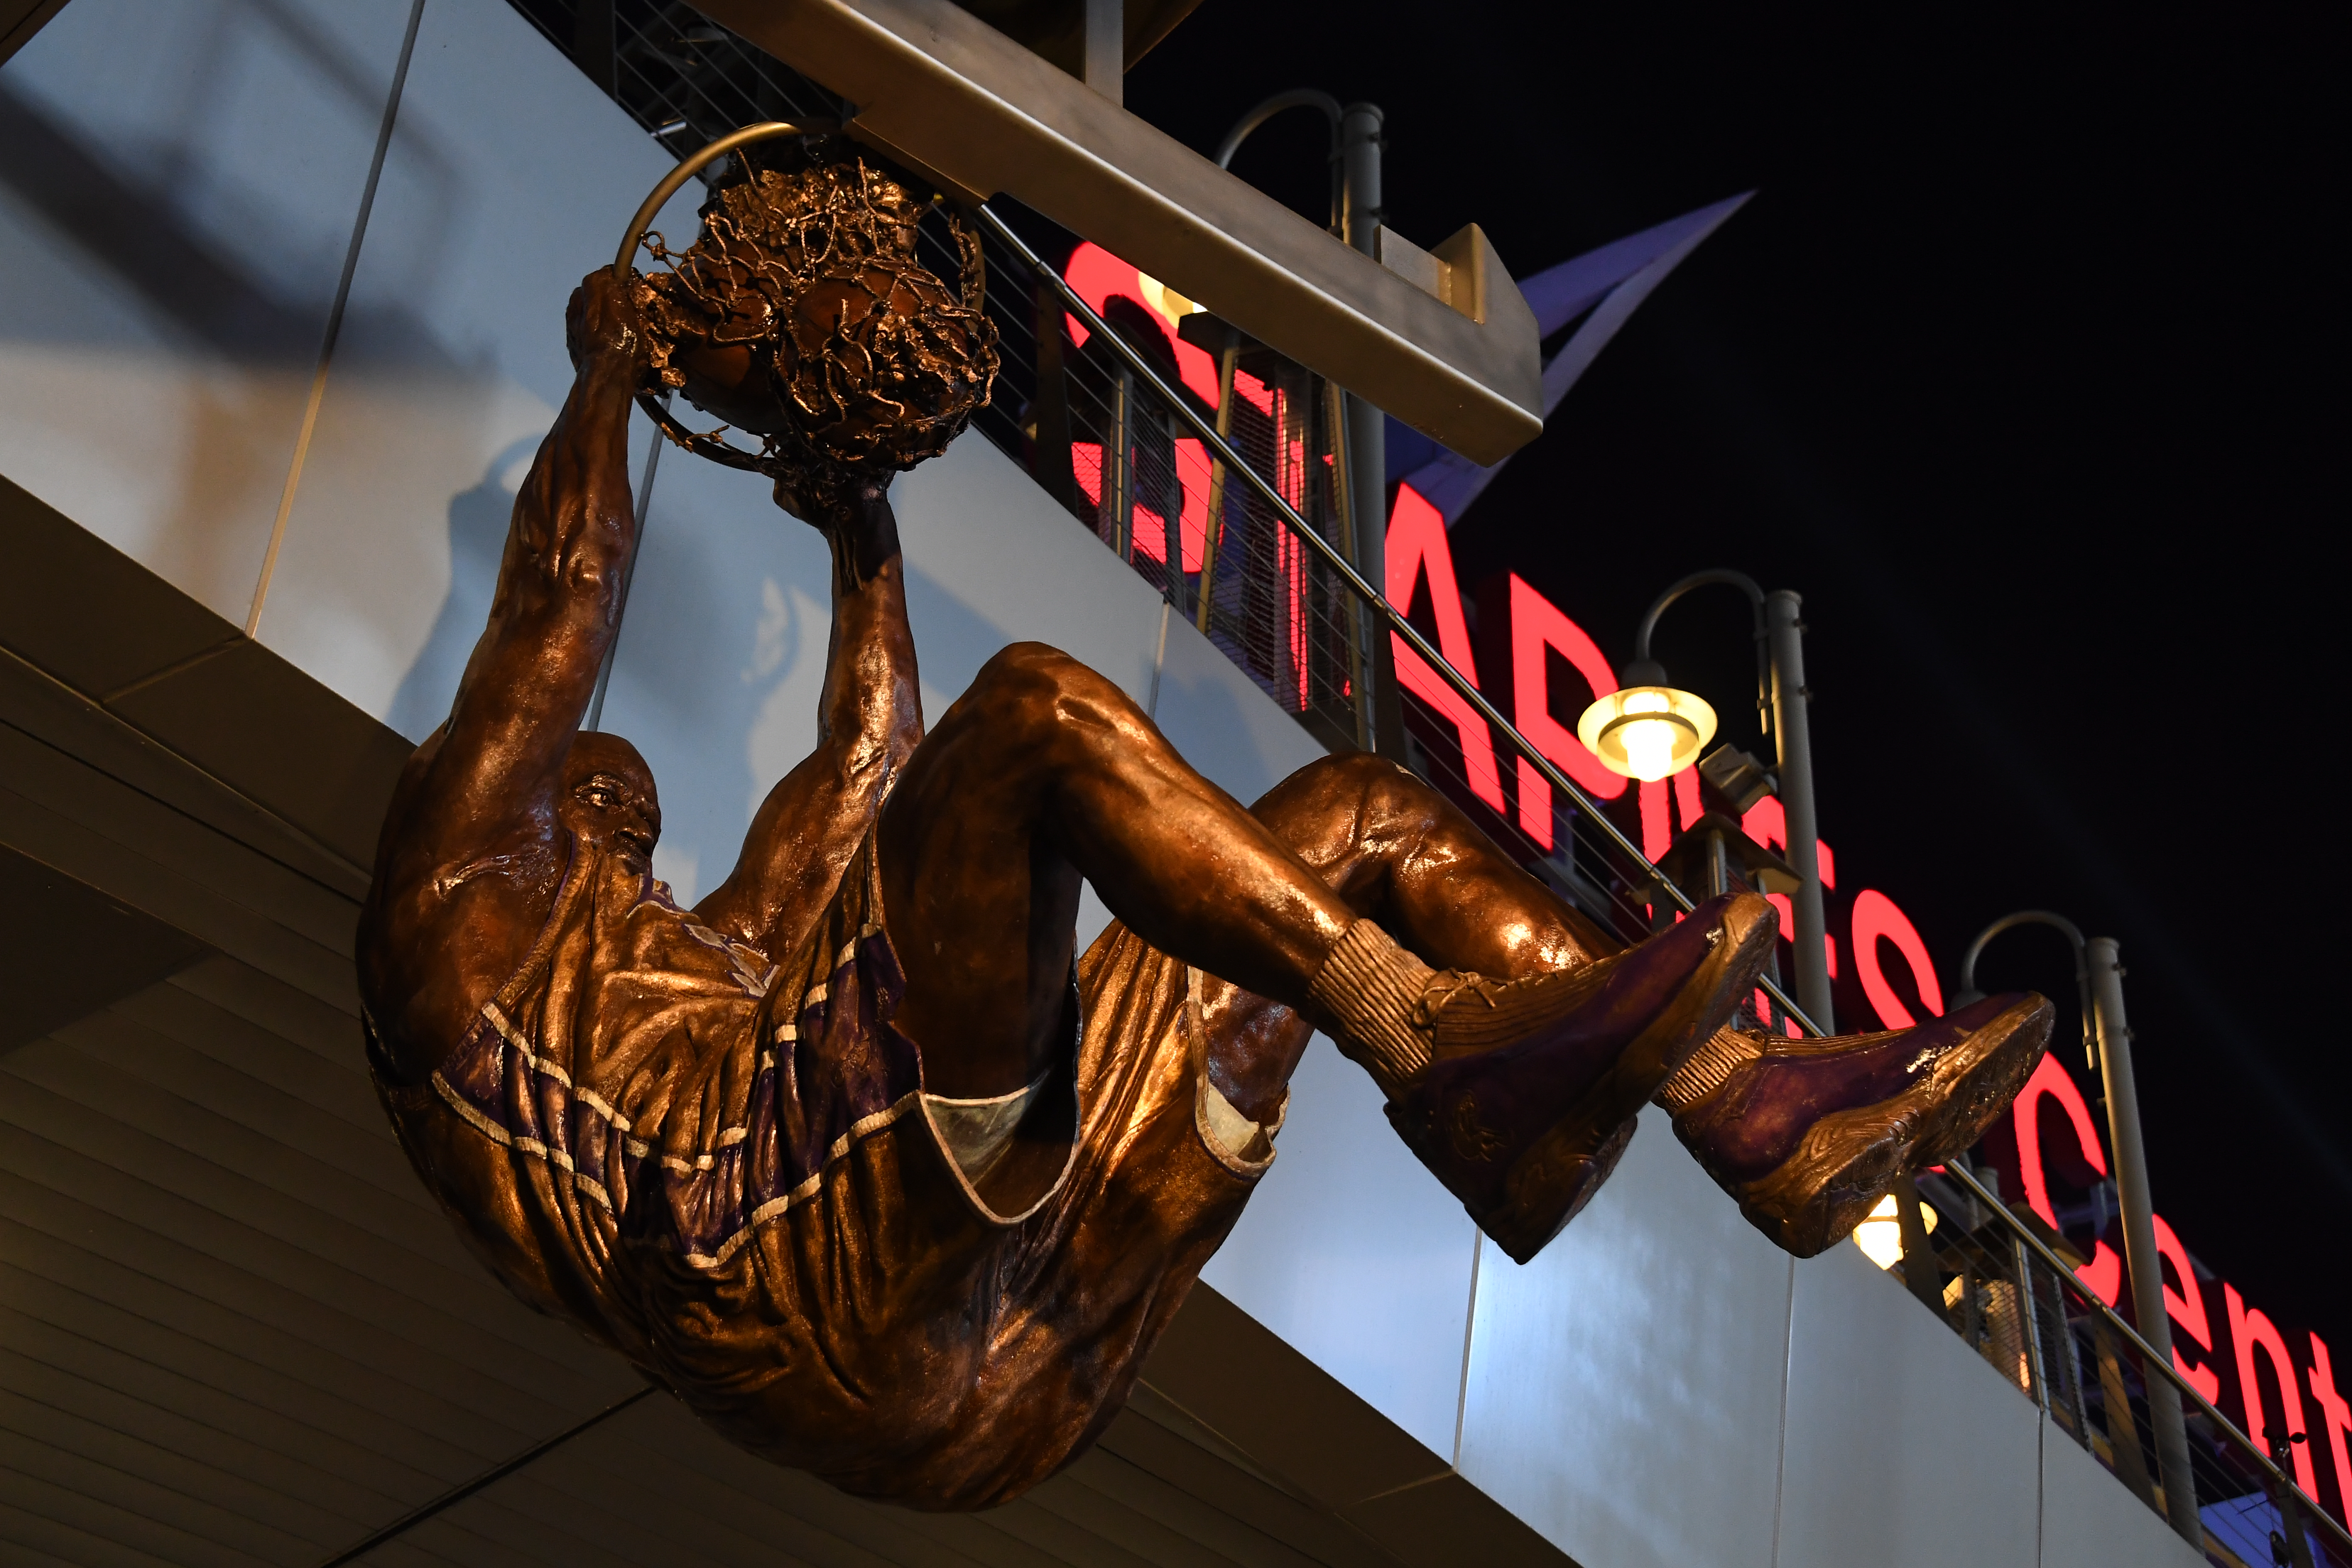 View looking up at statue with Staples Center sign in background